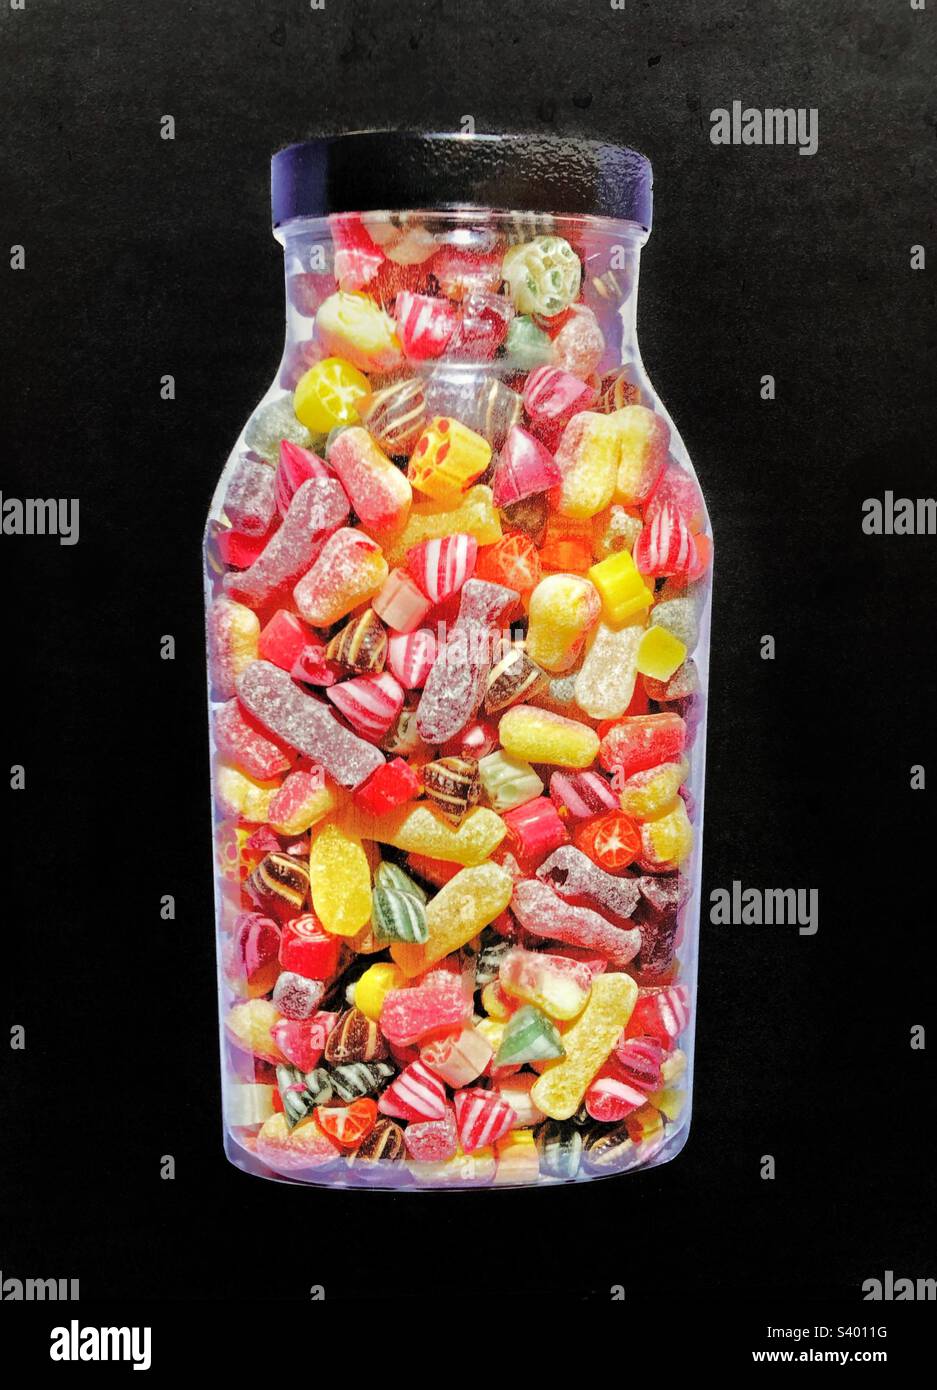 A large jar of traditional and colourful boiled sweets or candy on a black background Stock Photo